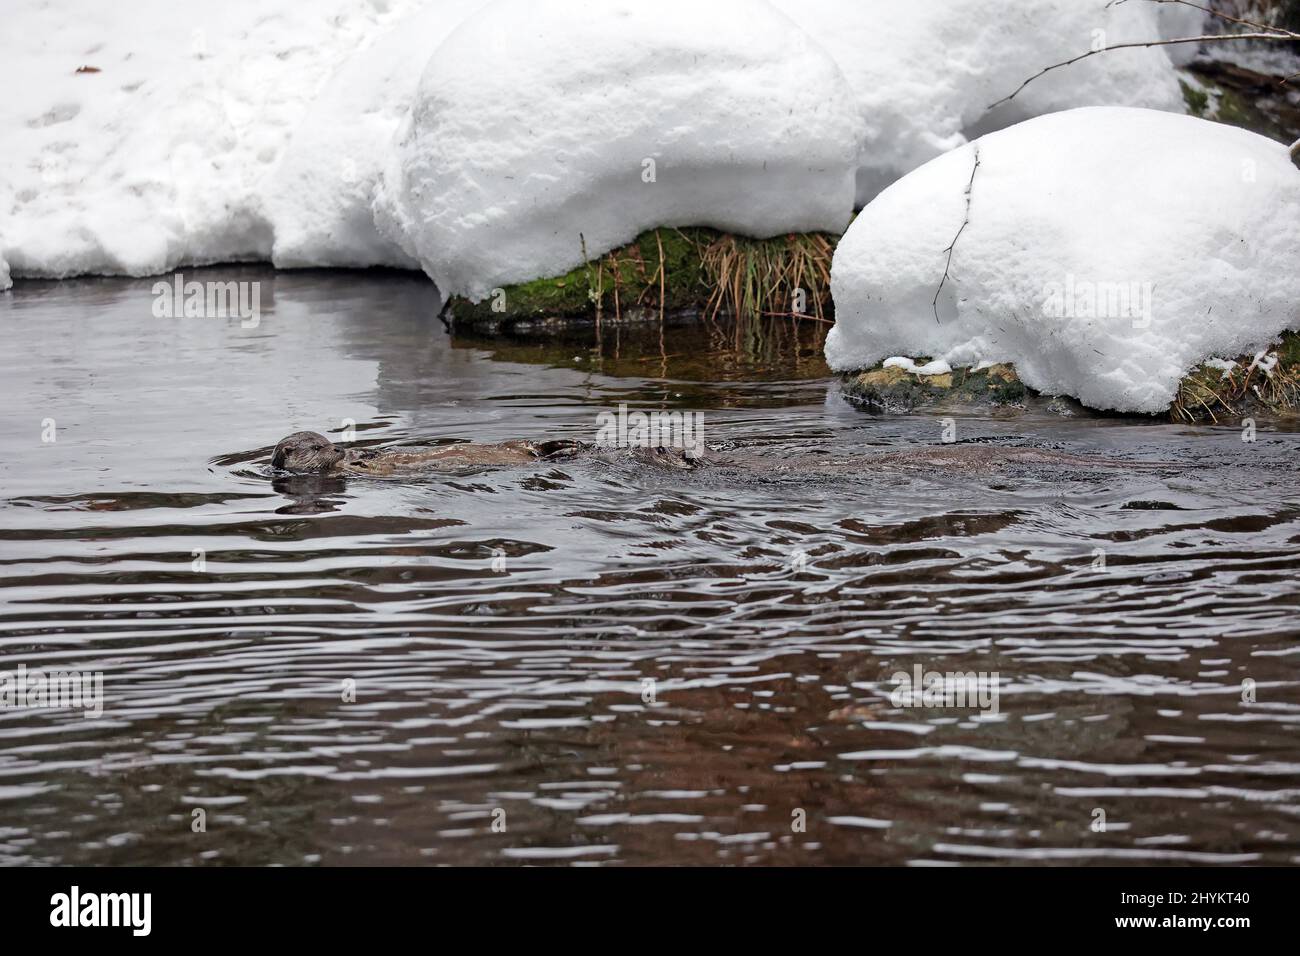 European otter (Lutra lutra), snow, swimming in water, National Park ...